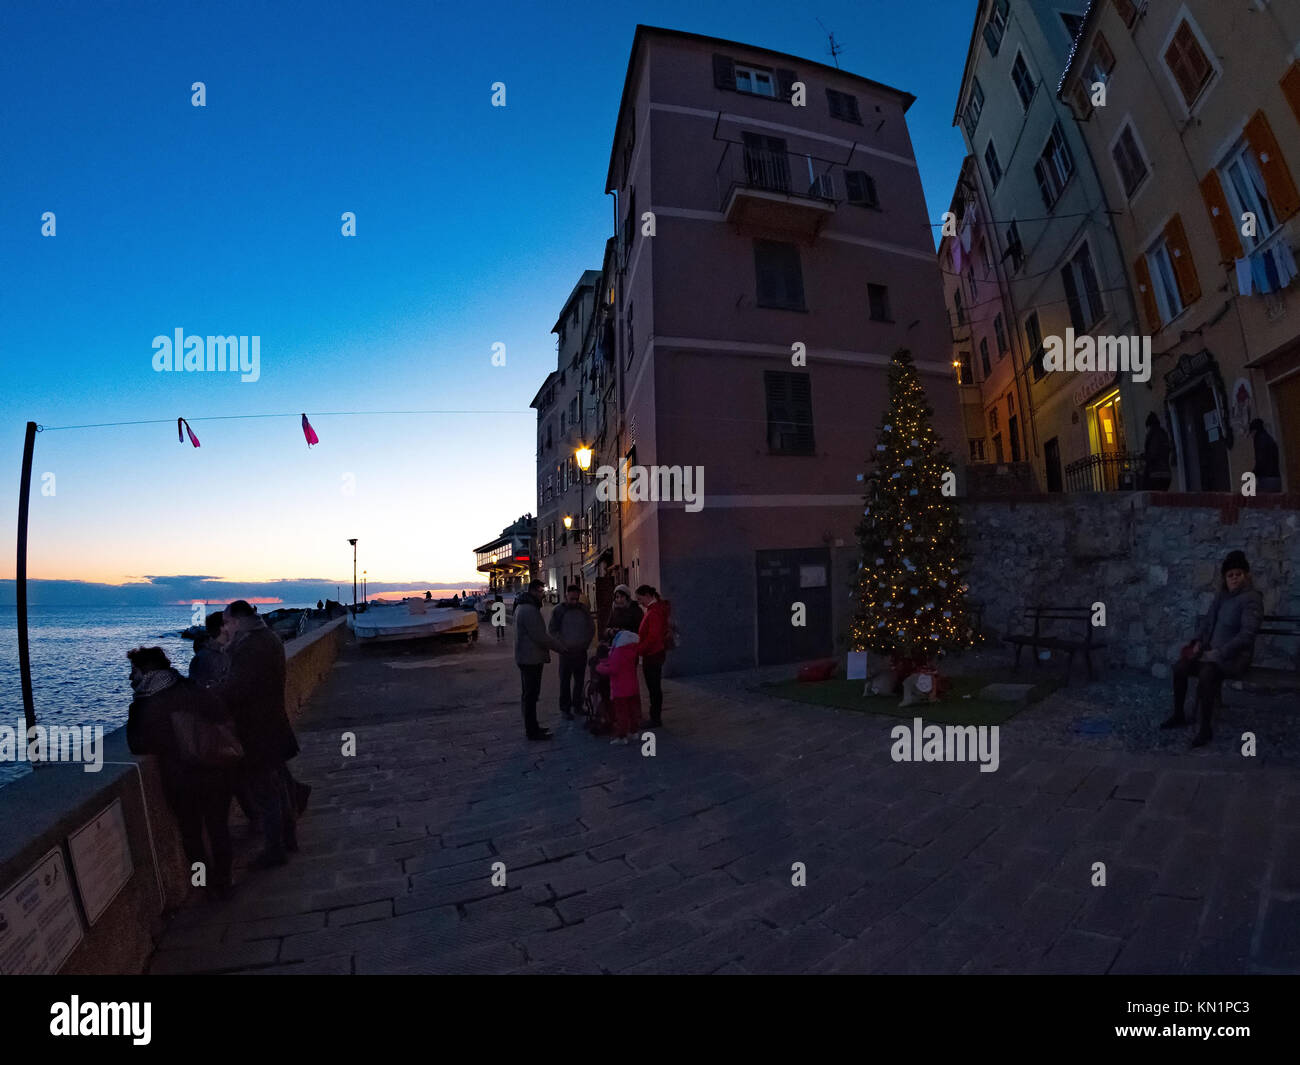 Genoa, ITALY - DECEMBER 09:In Boccadasse, an enchanted village in Genoa, where the lights of Christmas make its beauty and particularity even more suggestive. A fishing village that has maintained all its beauty over time.on DECEMBER 09, 2017 in Genoa, Italy.    HOW TO LICENCE THIS PICTURE: please contact us via e-mail at awakeningve@gmai.com for prices and terms of copyright. First Use Only ,Editorial Use Only, All repros payable, No Archiving. Stock Photo